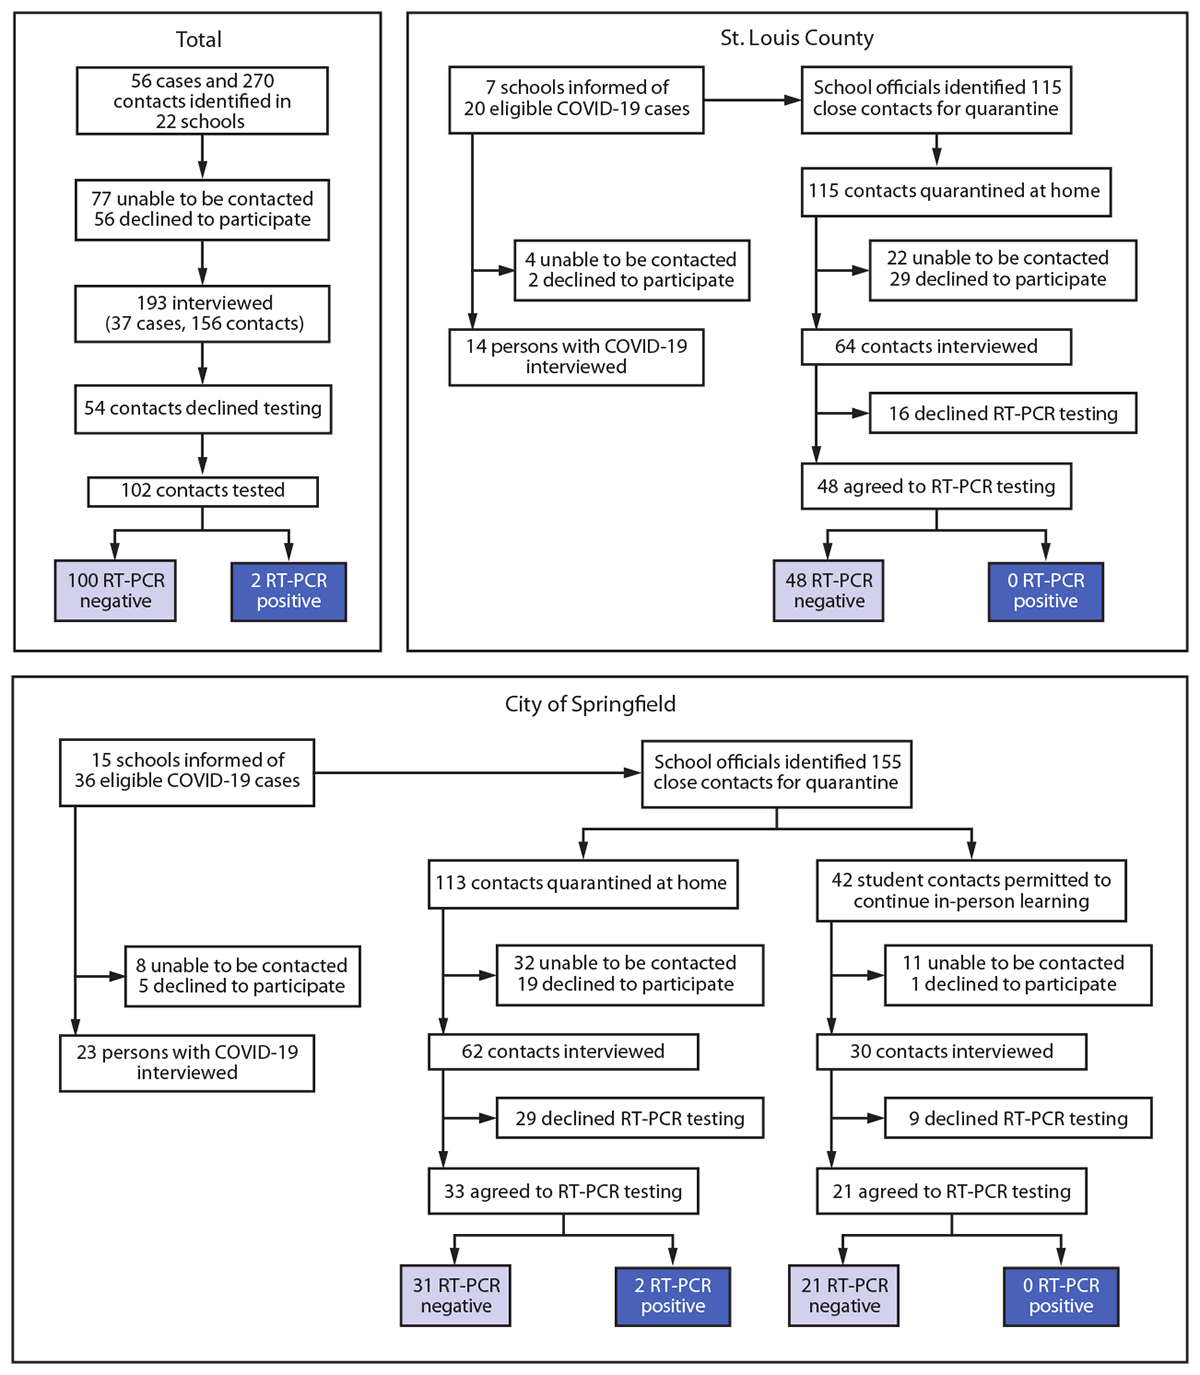 This figure is a flow chart showing the identification of 56 students teachers, and staff members with COVID-19 who had a total of 270 contacts with school-based exposure in 22 Missouri schools in December 2020, as well as the SARS-CoV-2 test results of the 102 contacts who received testing; two (2&#37;) received positive SARS-CoV-2 test results.